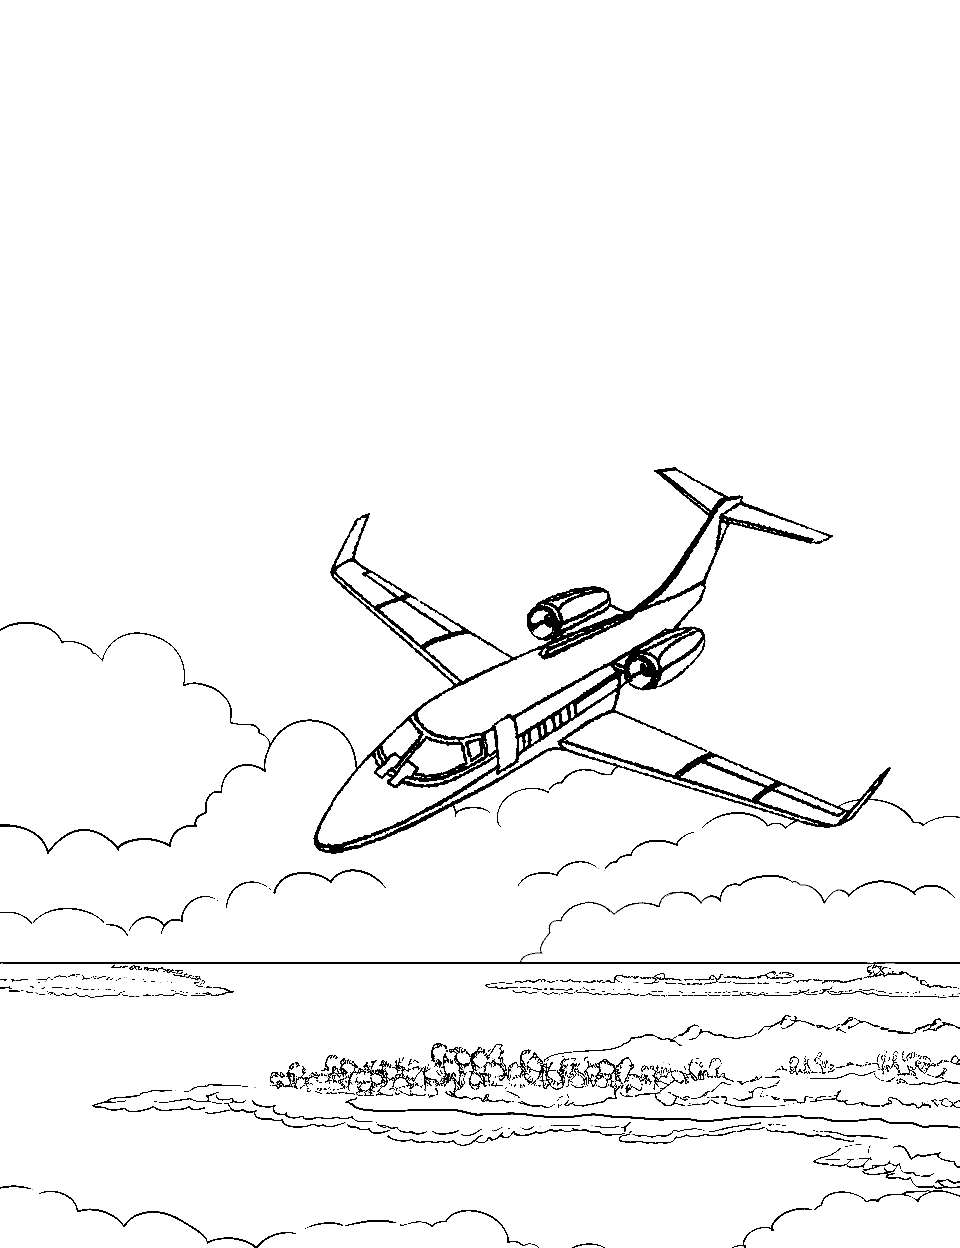 Luxury Private Jet Airplane Coloring Page - A sleek private jet flying over a coastal area.